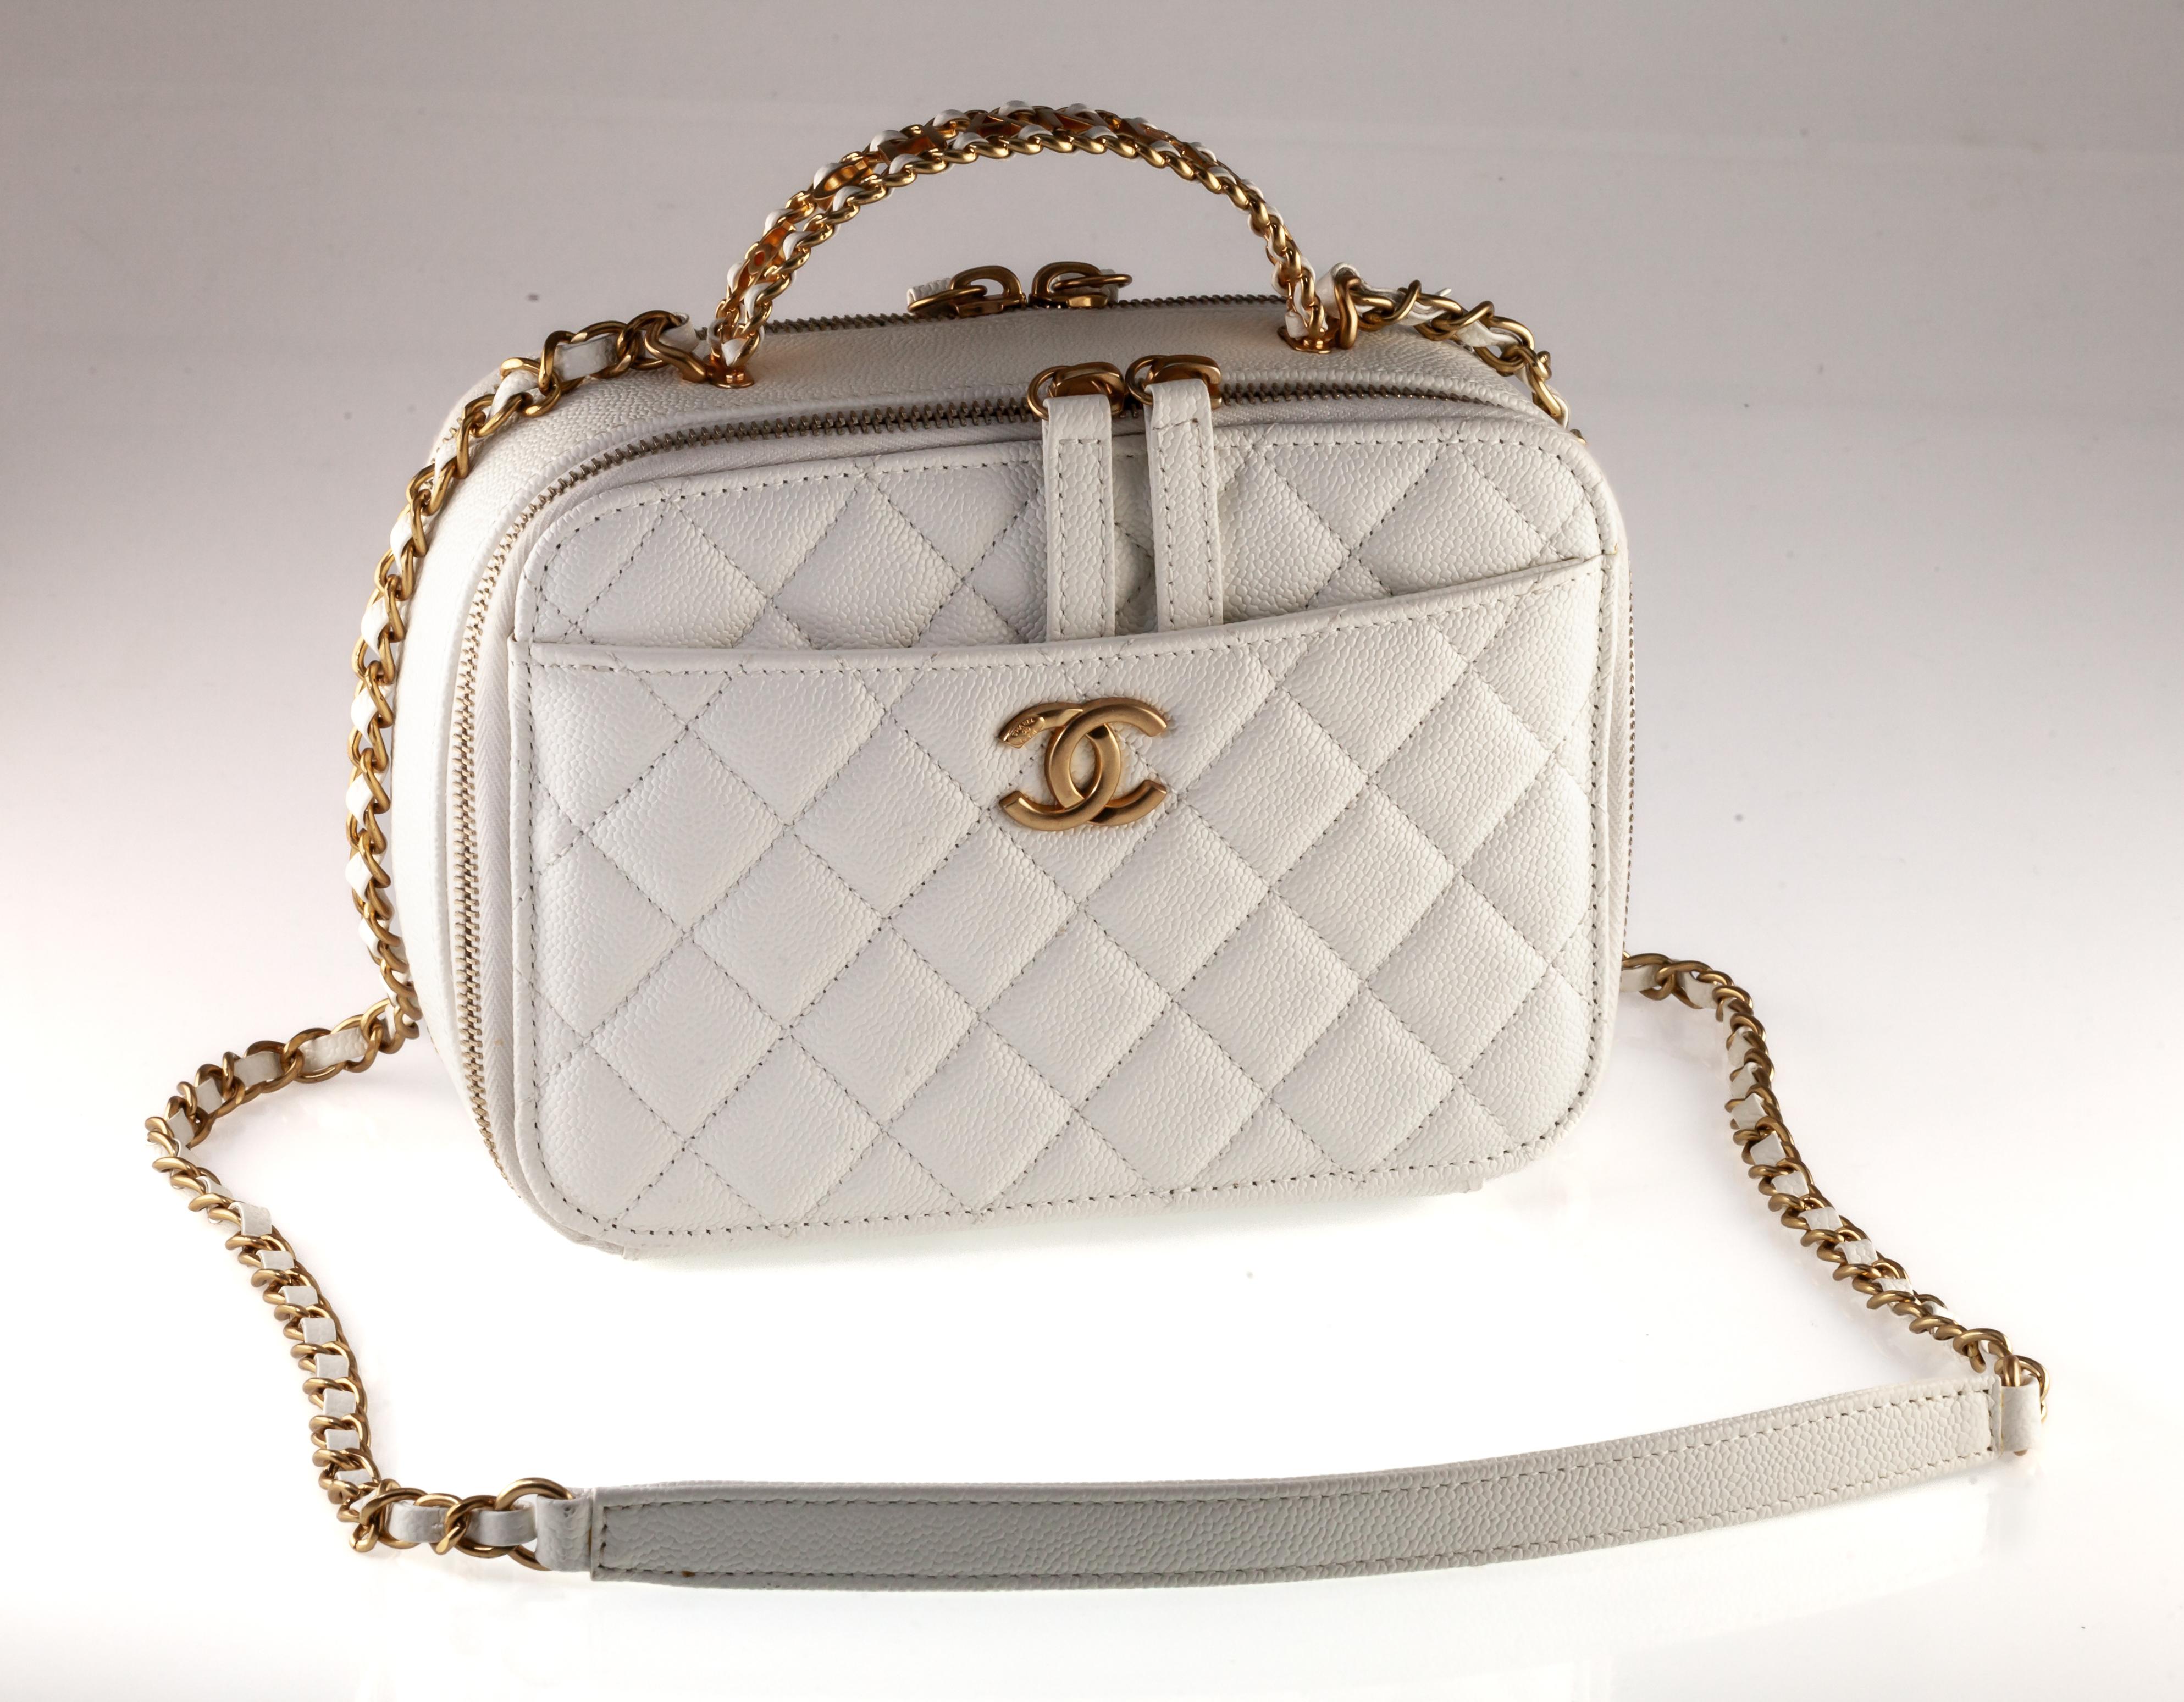 Gorgeous Chanel Caviar Leather Quilted Vanity Case
Features Gold Hardware and White Leather
Appx Width = 8